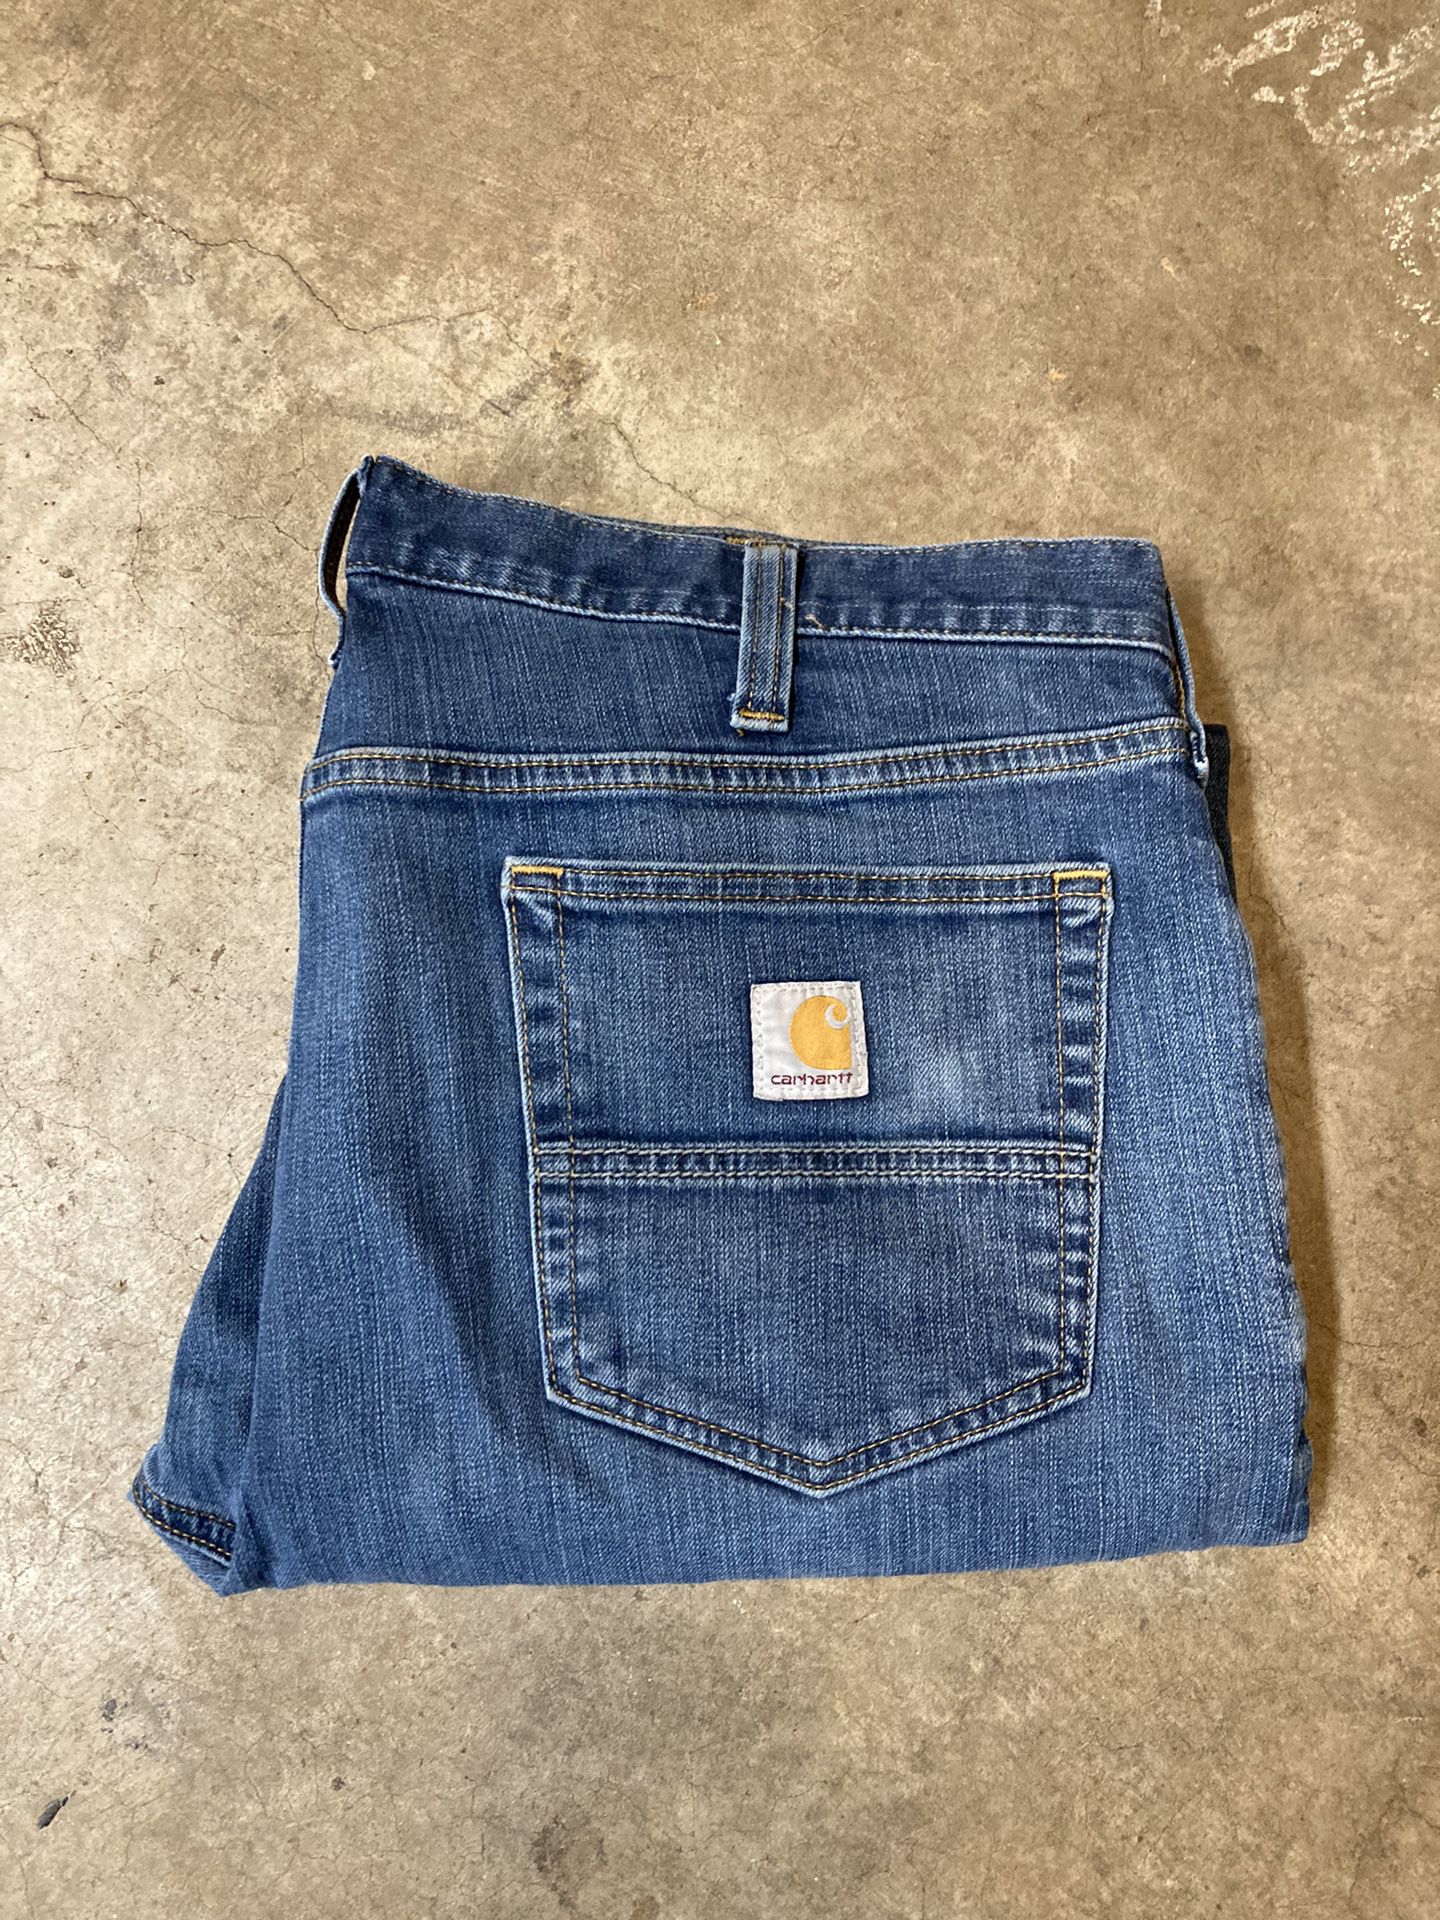 Carhartt Relaxed Fit Jeans Size 36x30